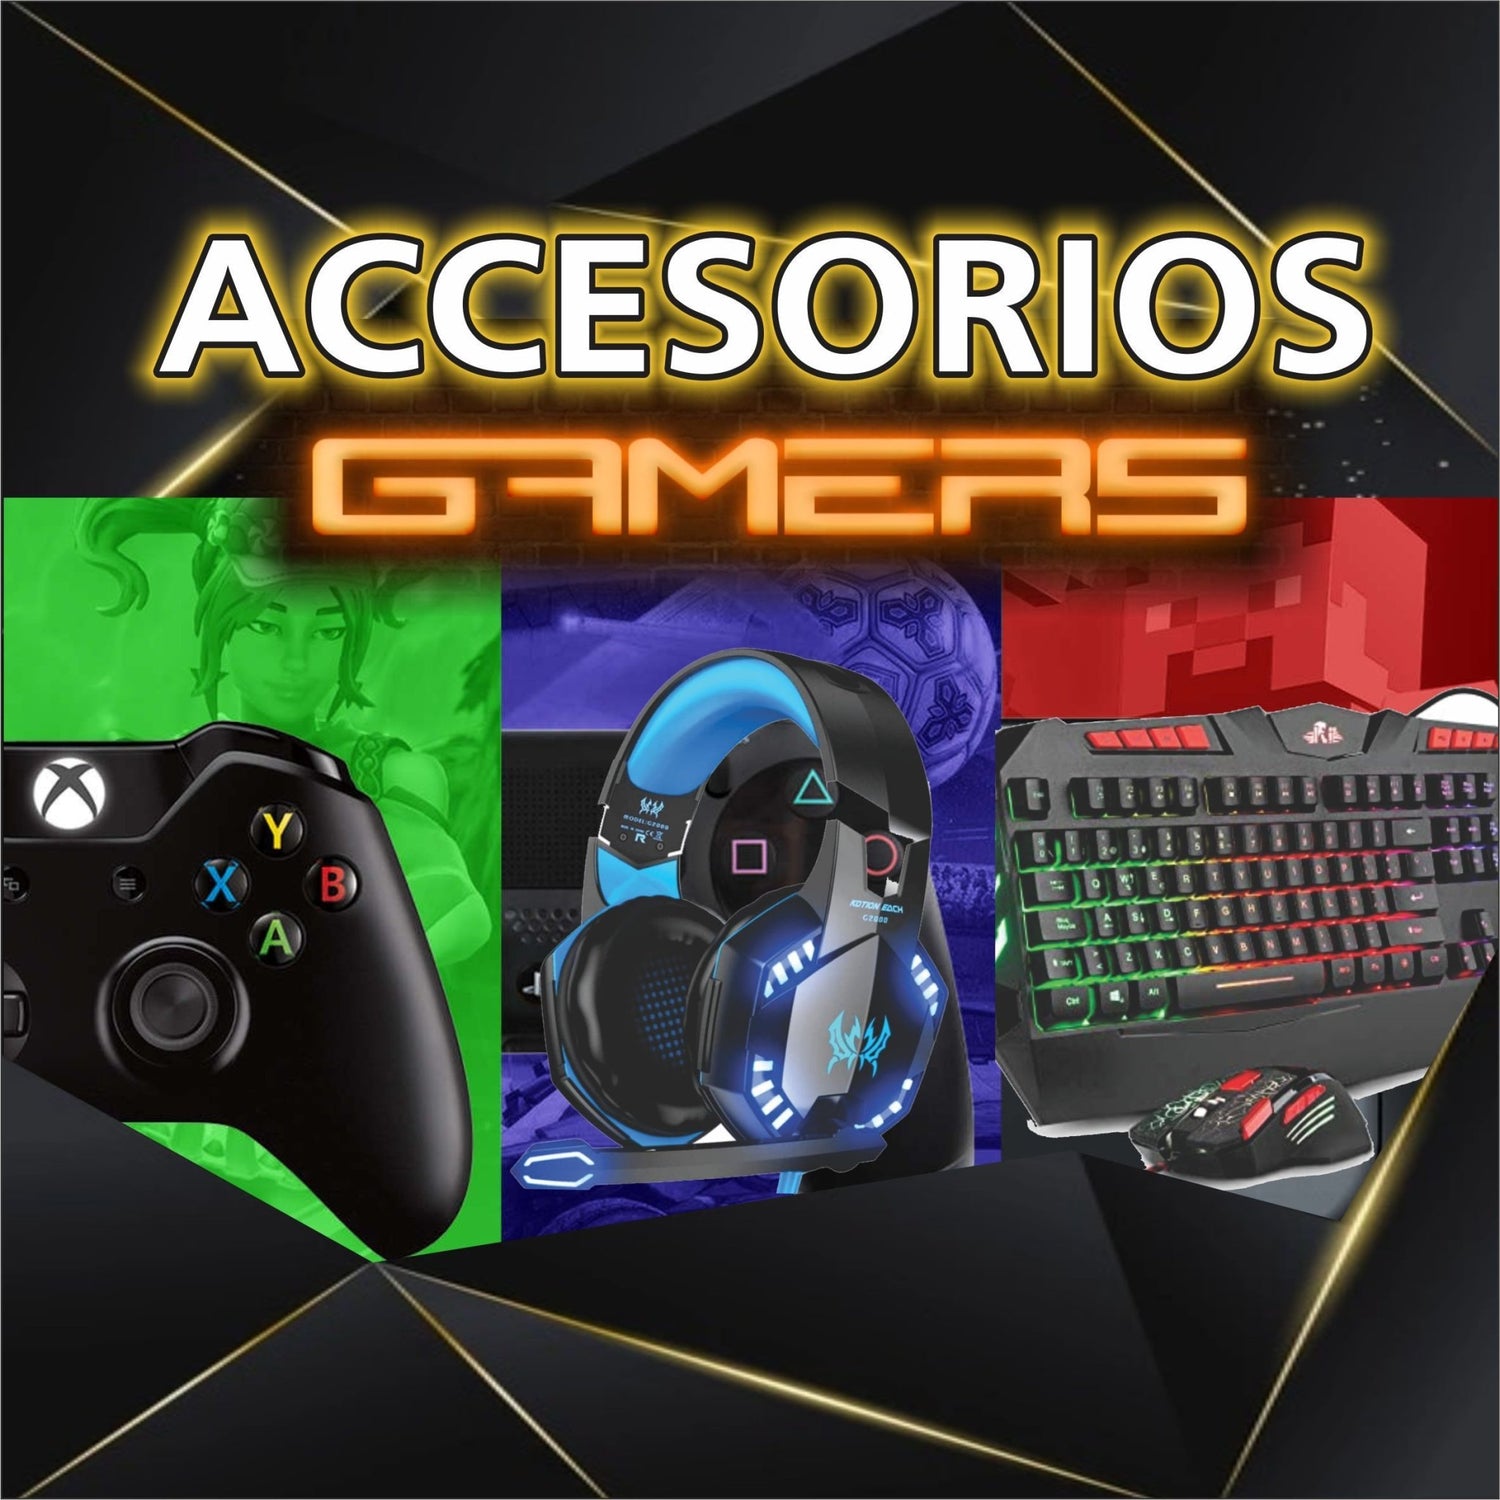 Accesorios Gamer | colombiahit